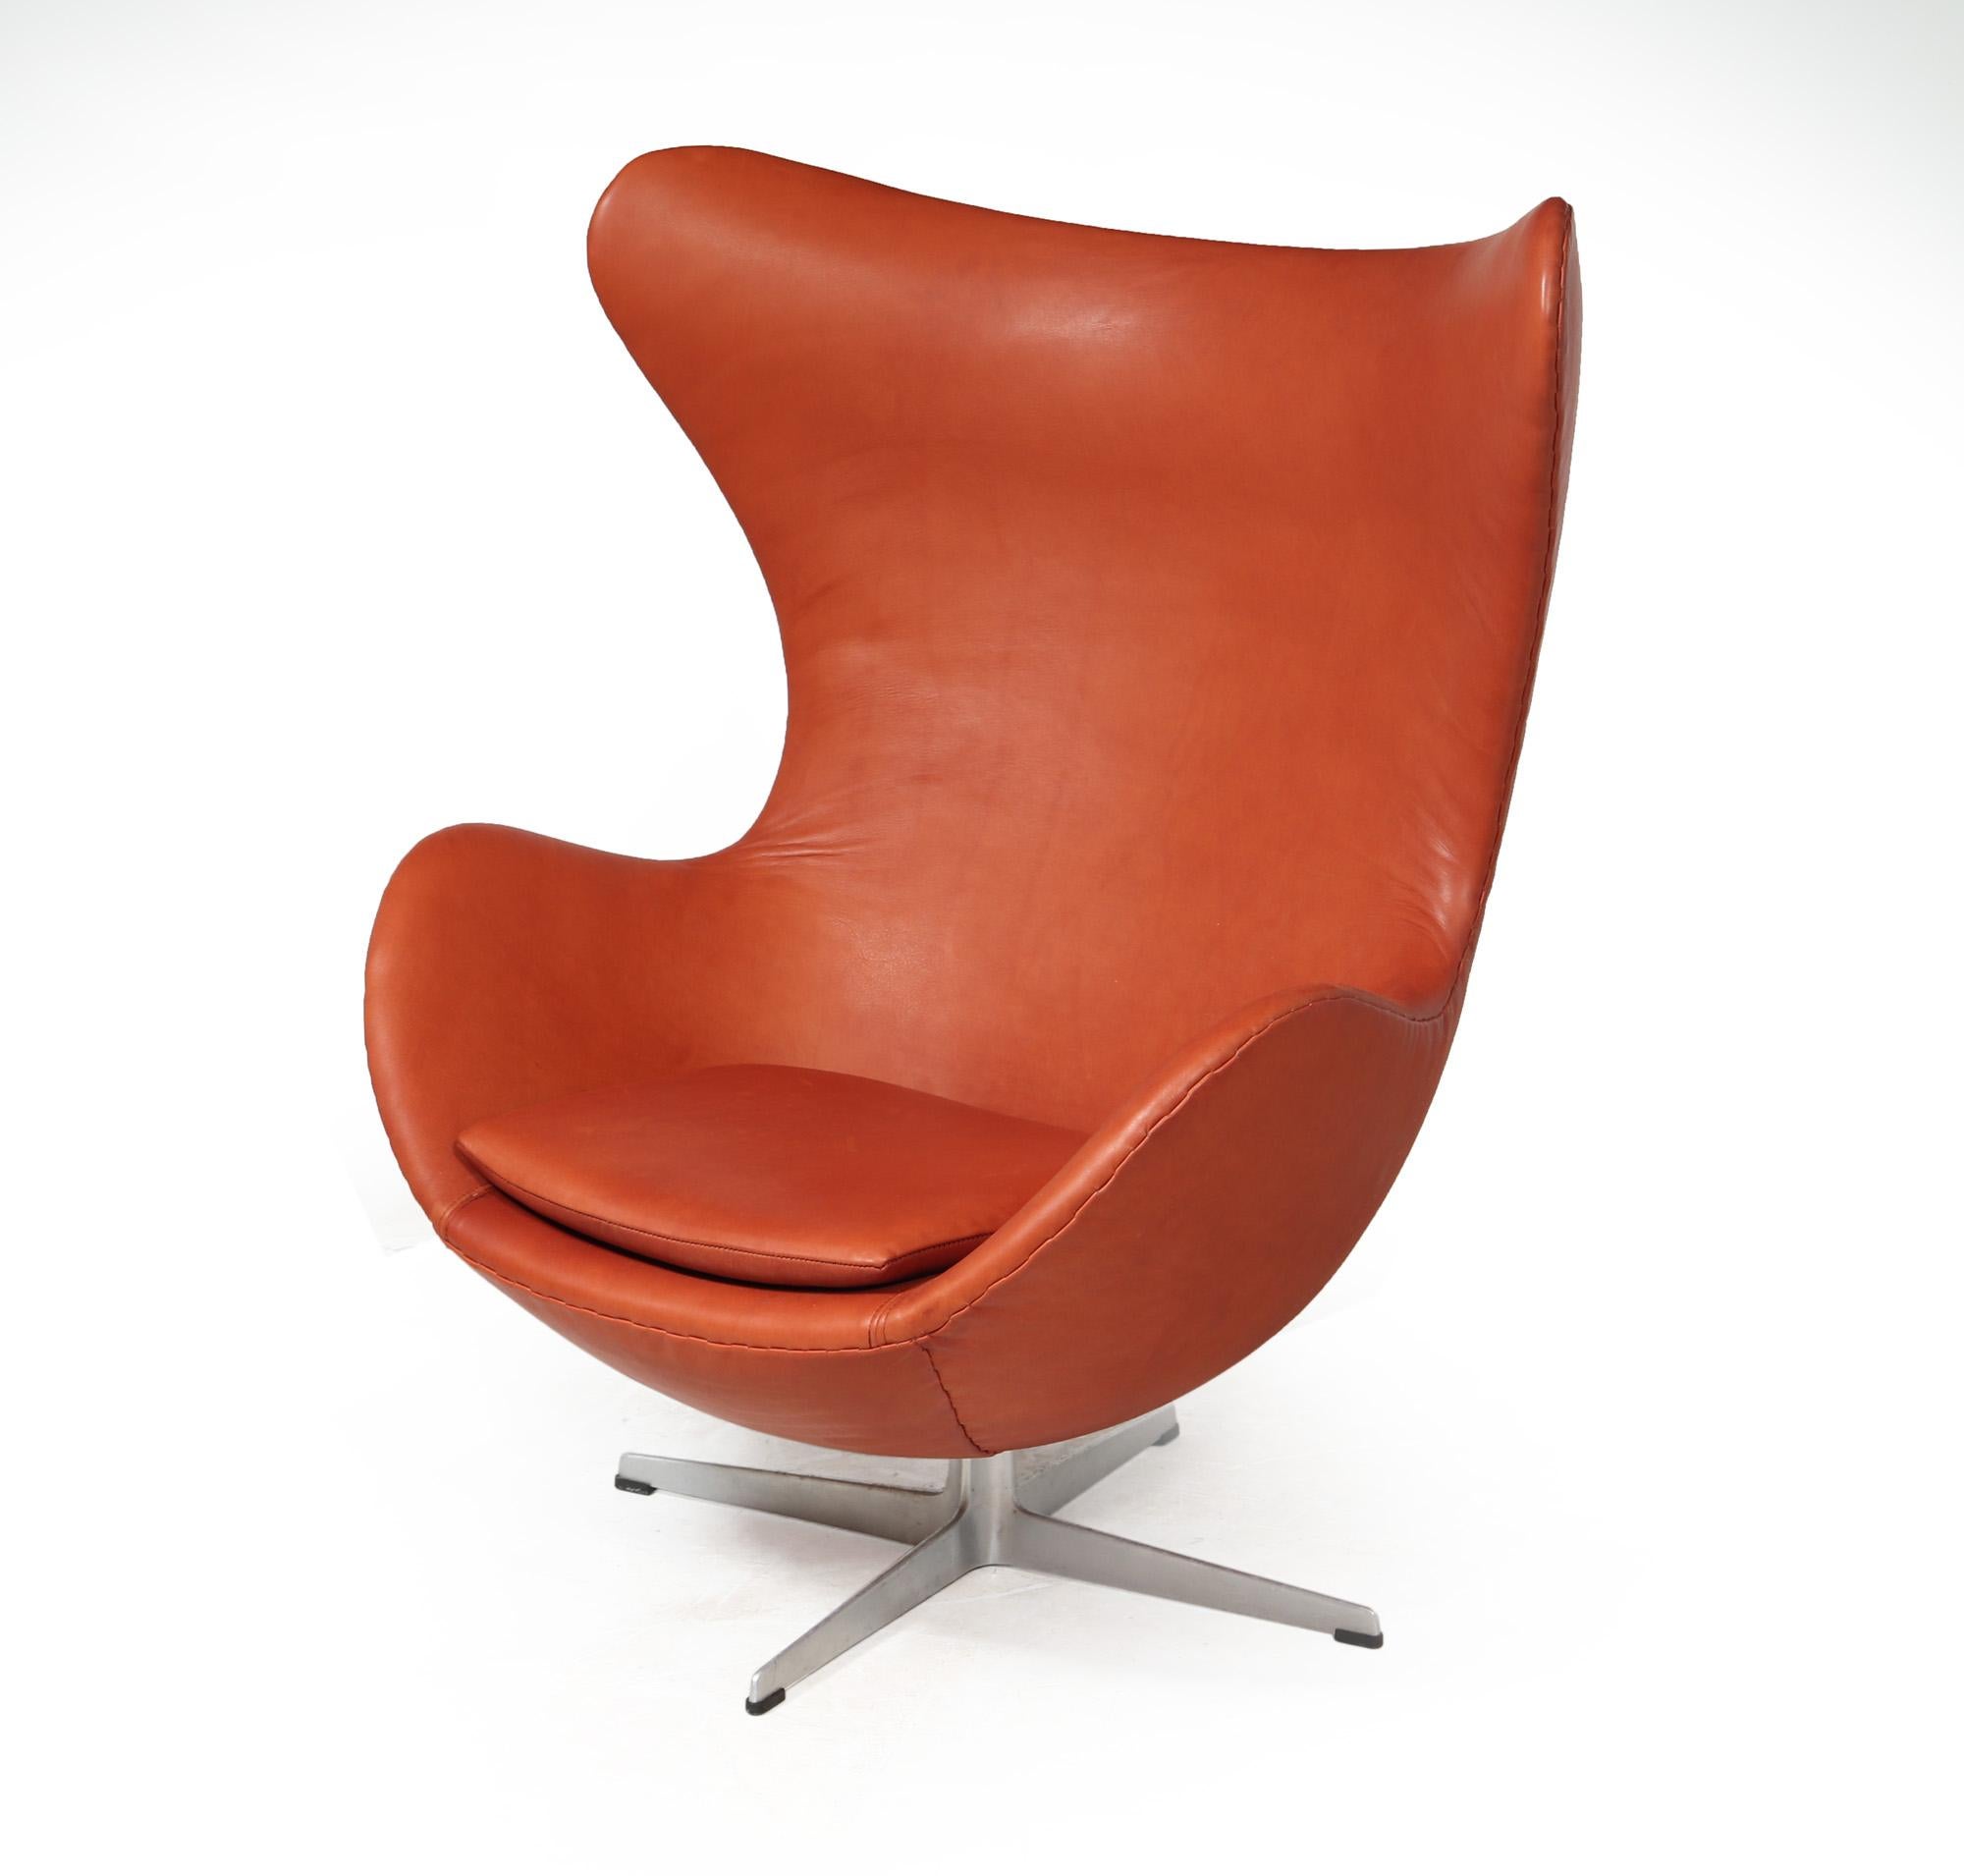 EGG CHAIR BY FRITZ HANSEN
Introducing the iconic Egg chair, a timeless design by Arne Jacobsen dating back to 1966, This recently reupholstered masterpiece boasts Italian Nappa leather, meticulously hand-stitched using original techniques for a